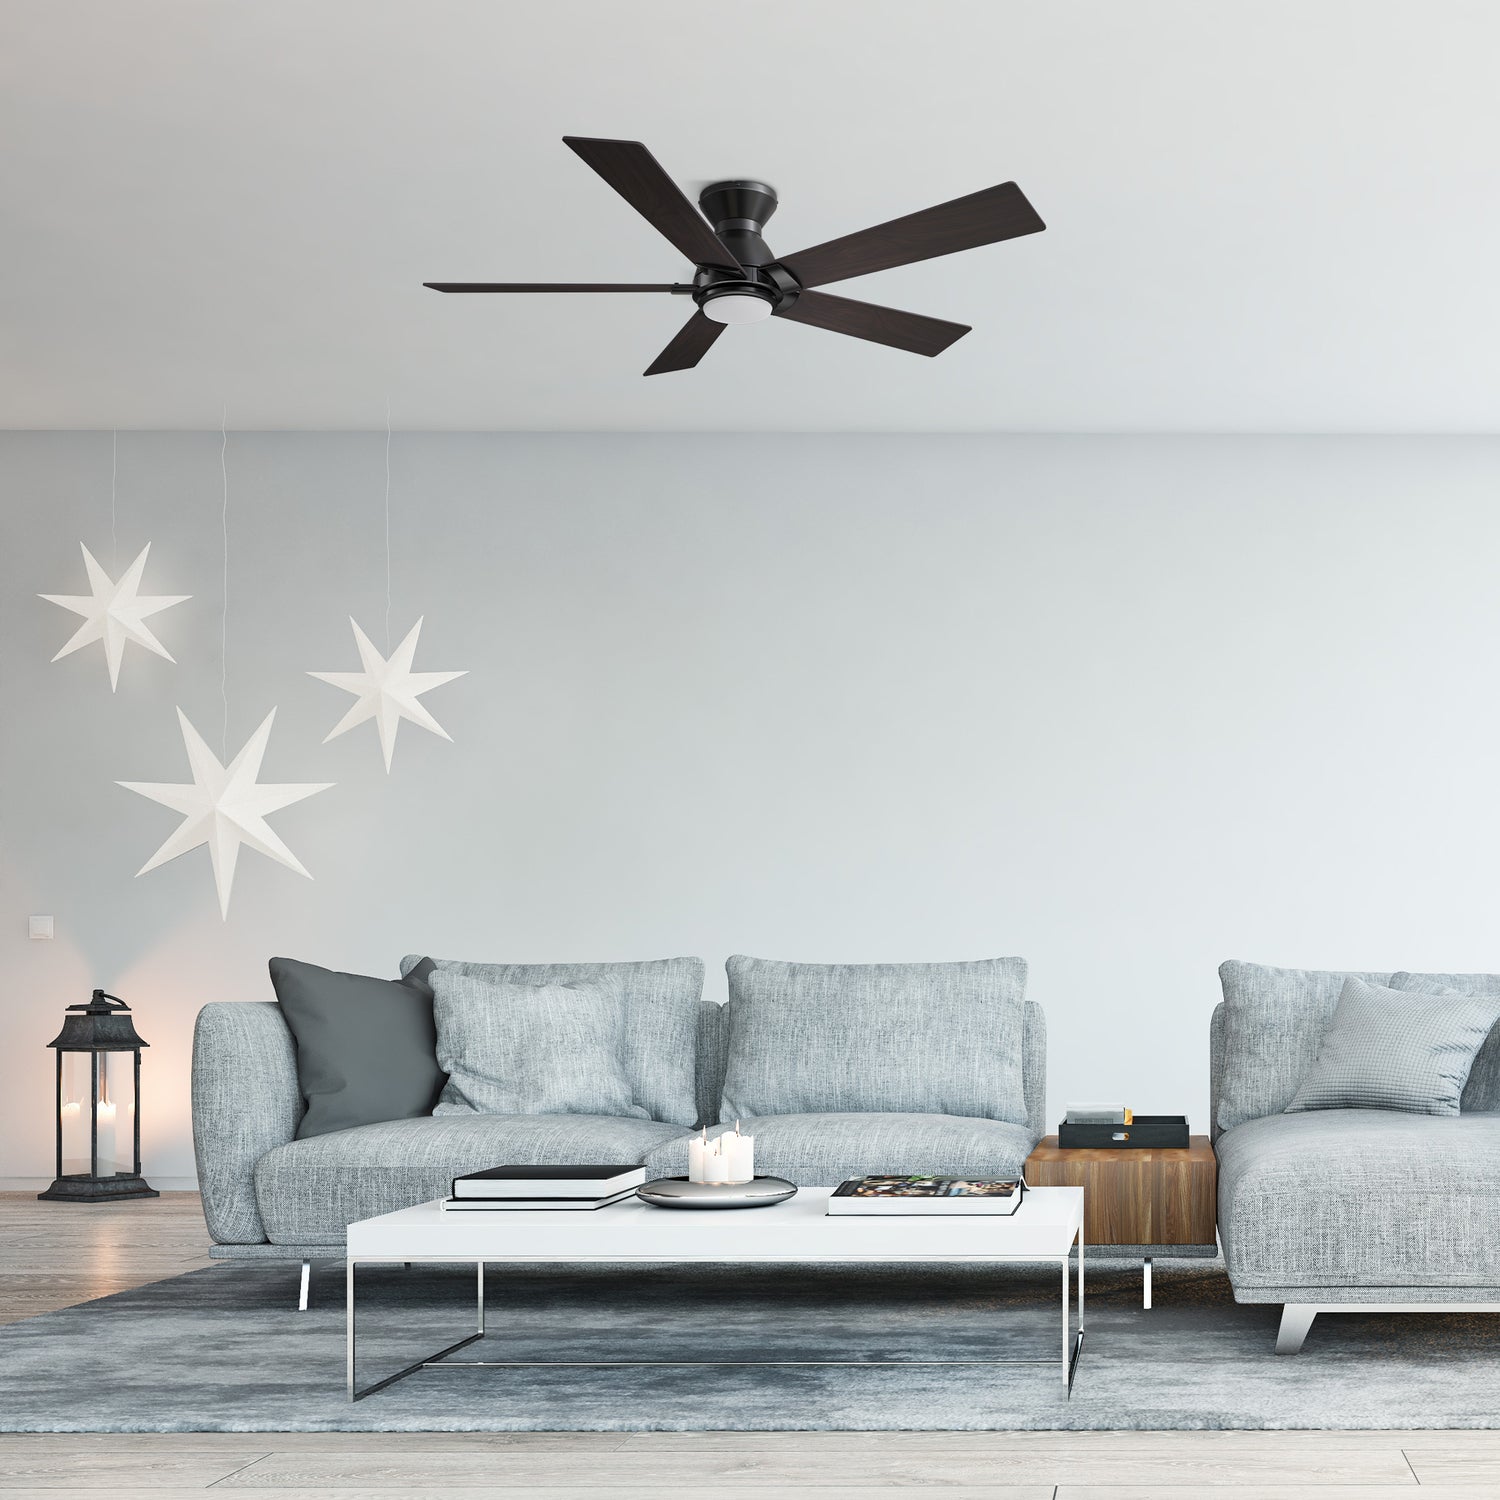 Carro Armoy 52 inch low profile remote control ceiling fan with light, 5 blades, dark wood design, installed in living room. 